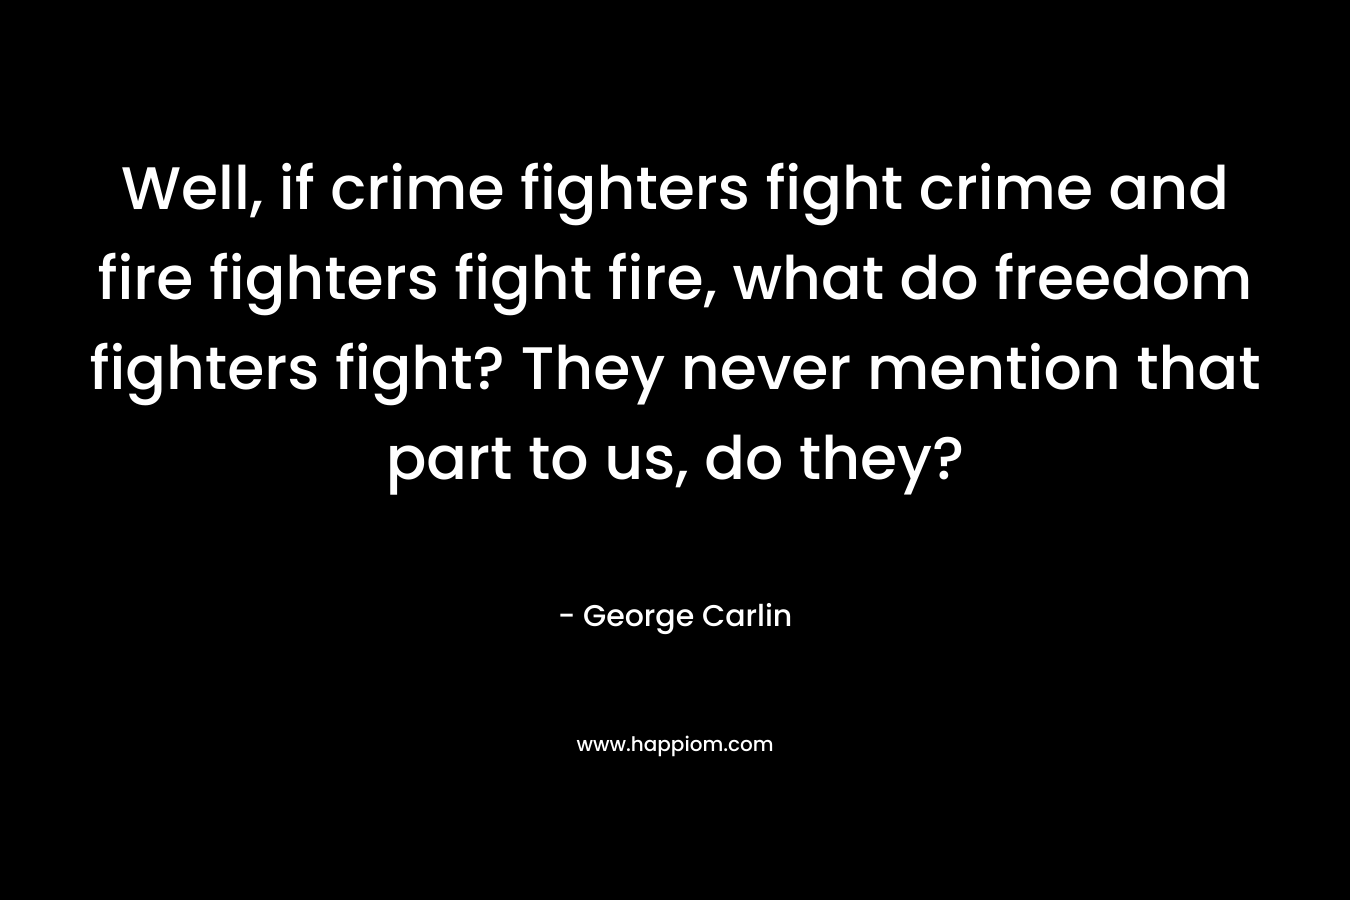 Well, if crime fighters fight crime and fire fighters fight fire, what do freedom fighters fight? They never mention that part to us, do they?